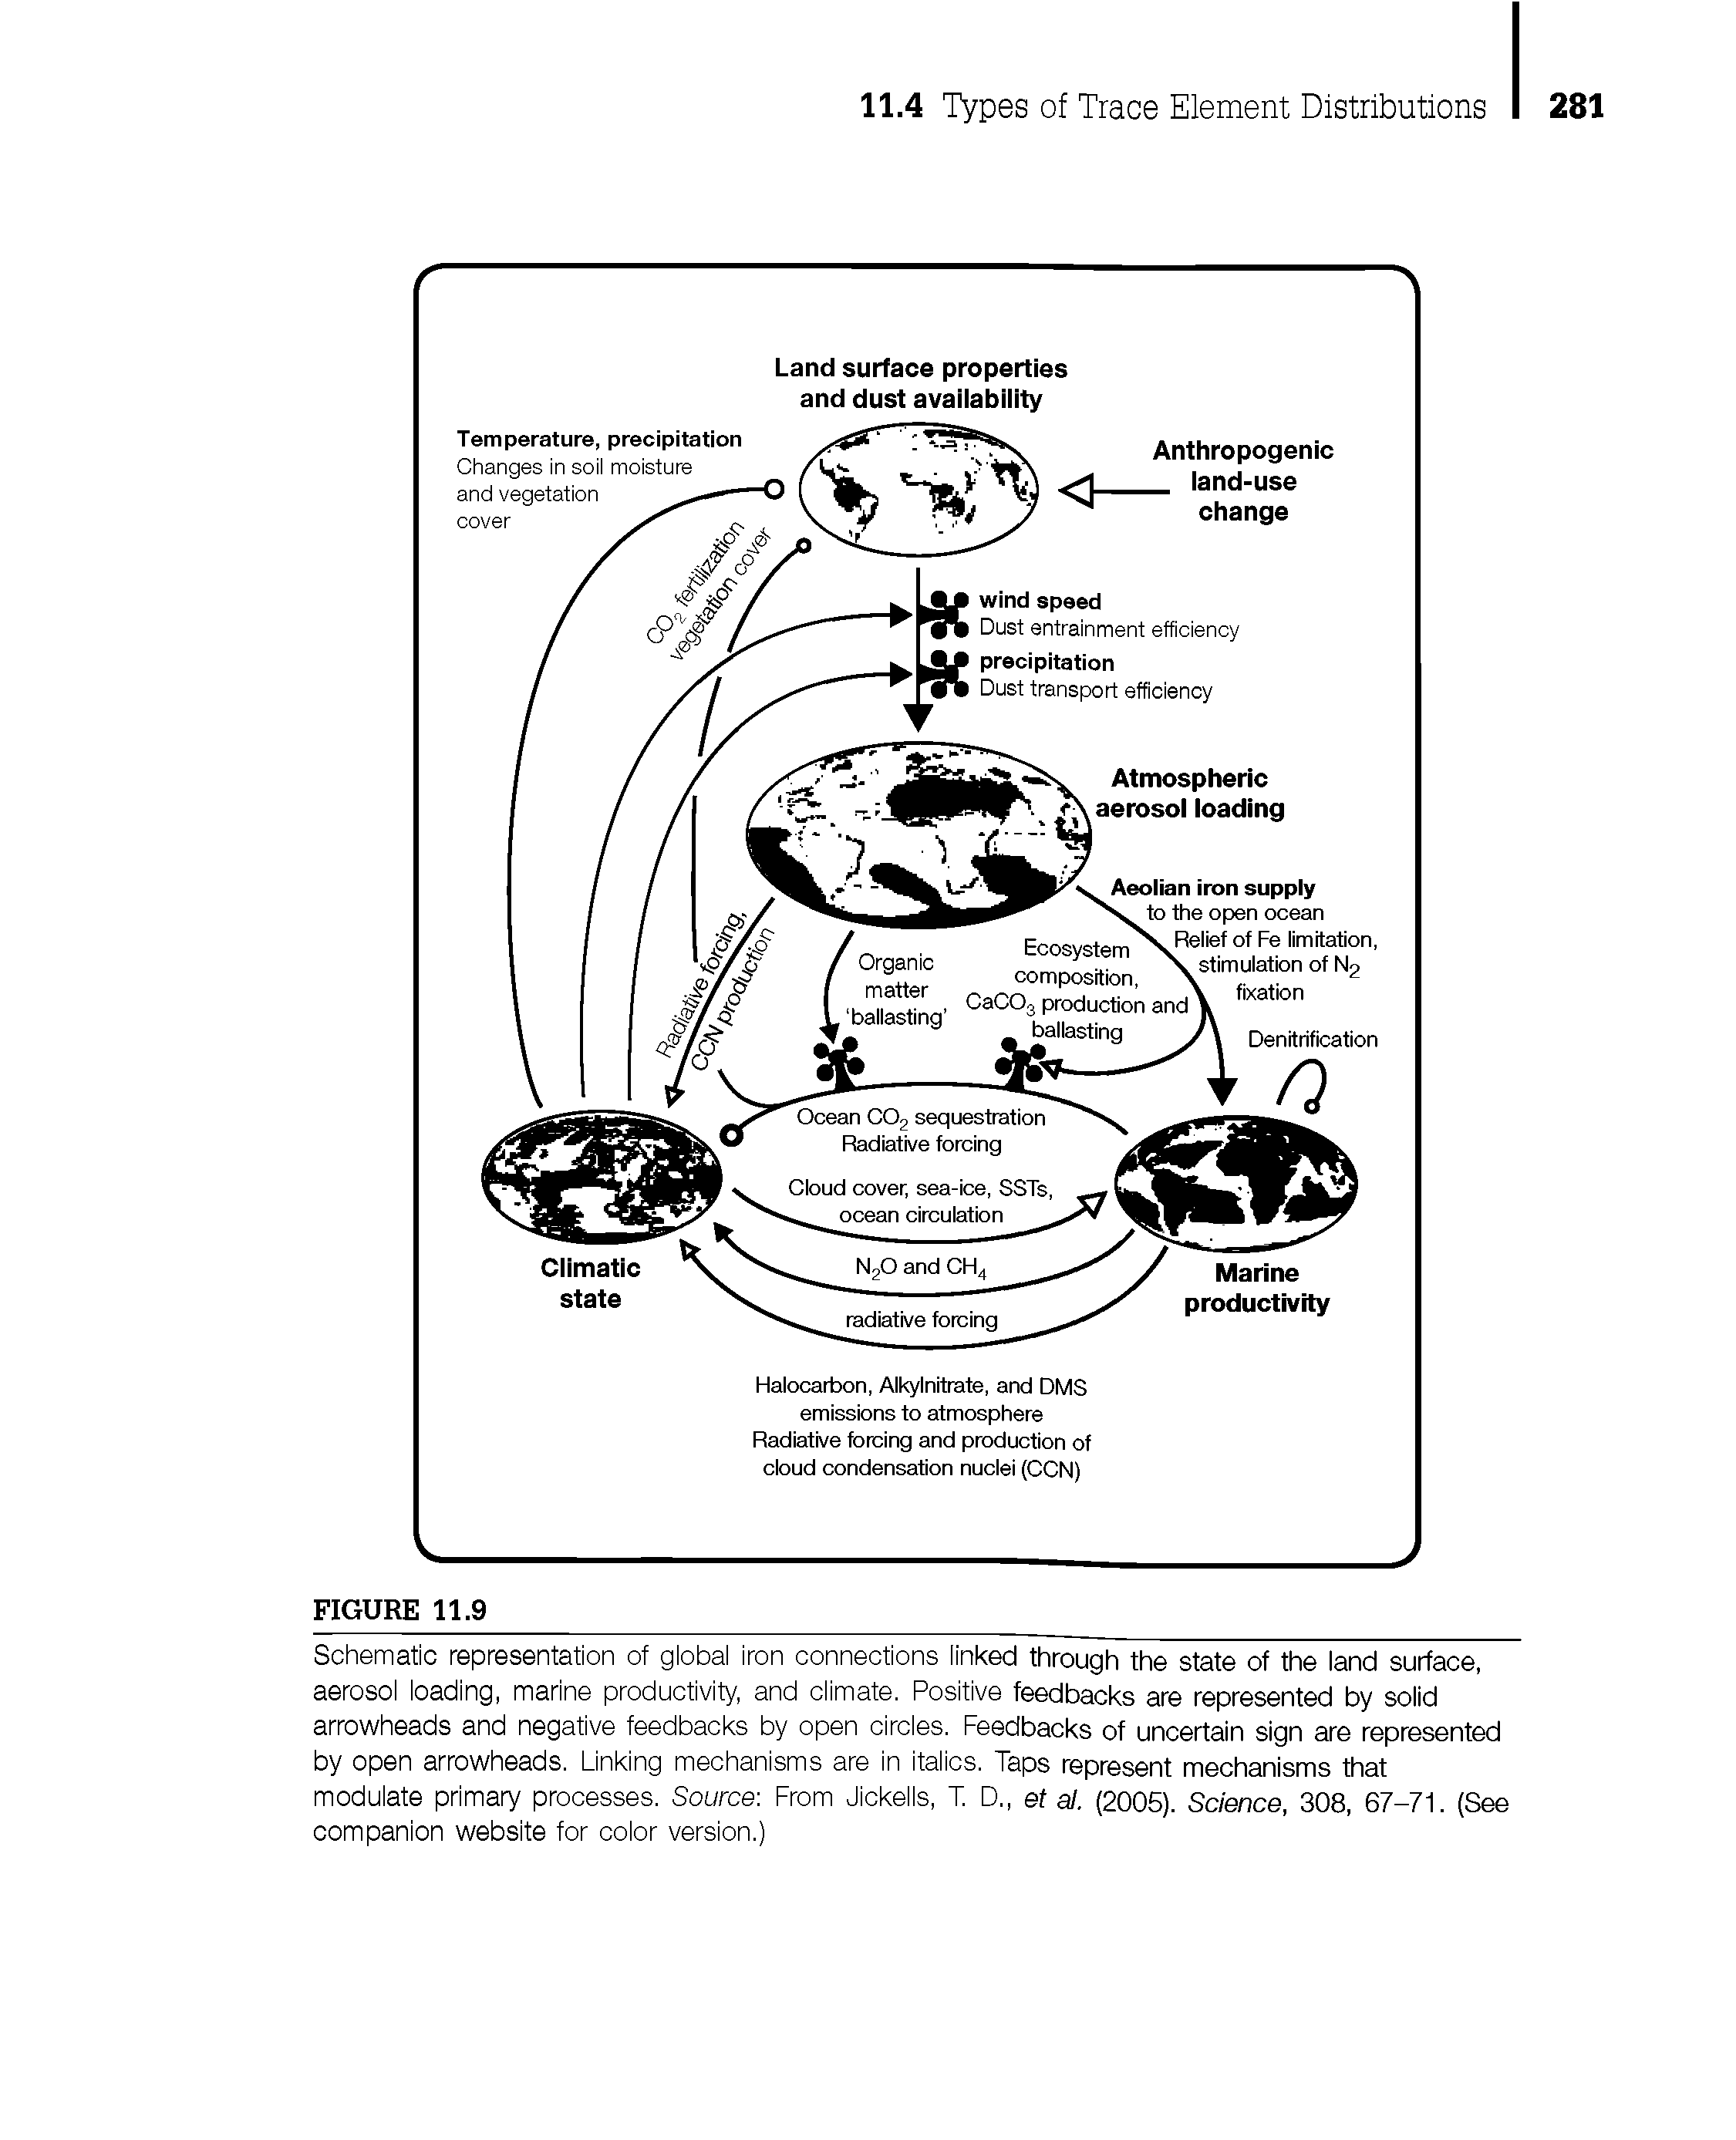 Schematic representation of global iron connections linked through the state of the land surface, aerosol loading, marine productivity, and climate. Positive feedbacks are represented by solid arrowheads and negative feedbacks by open circles. Feedbacks of uncertain sign are represented by open arrowheads. Linking mechanisms are in italics. Taps represent mechanisms that modulate primary processes. Source-. From Jickells, T. D., et al. (2005). Science, 308, 67-71. (See companion website for color version.)...